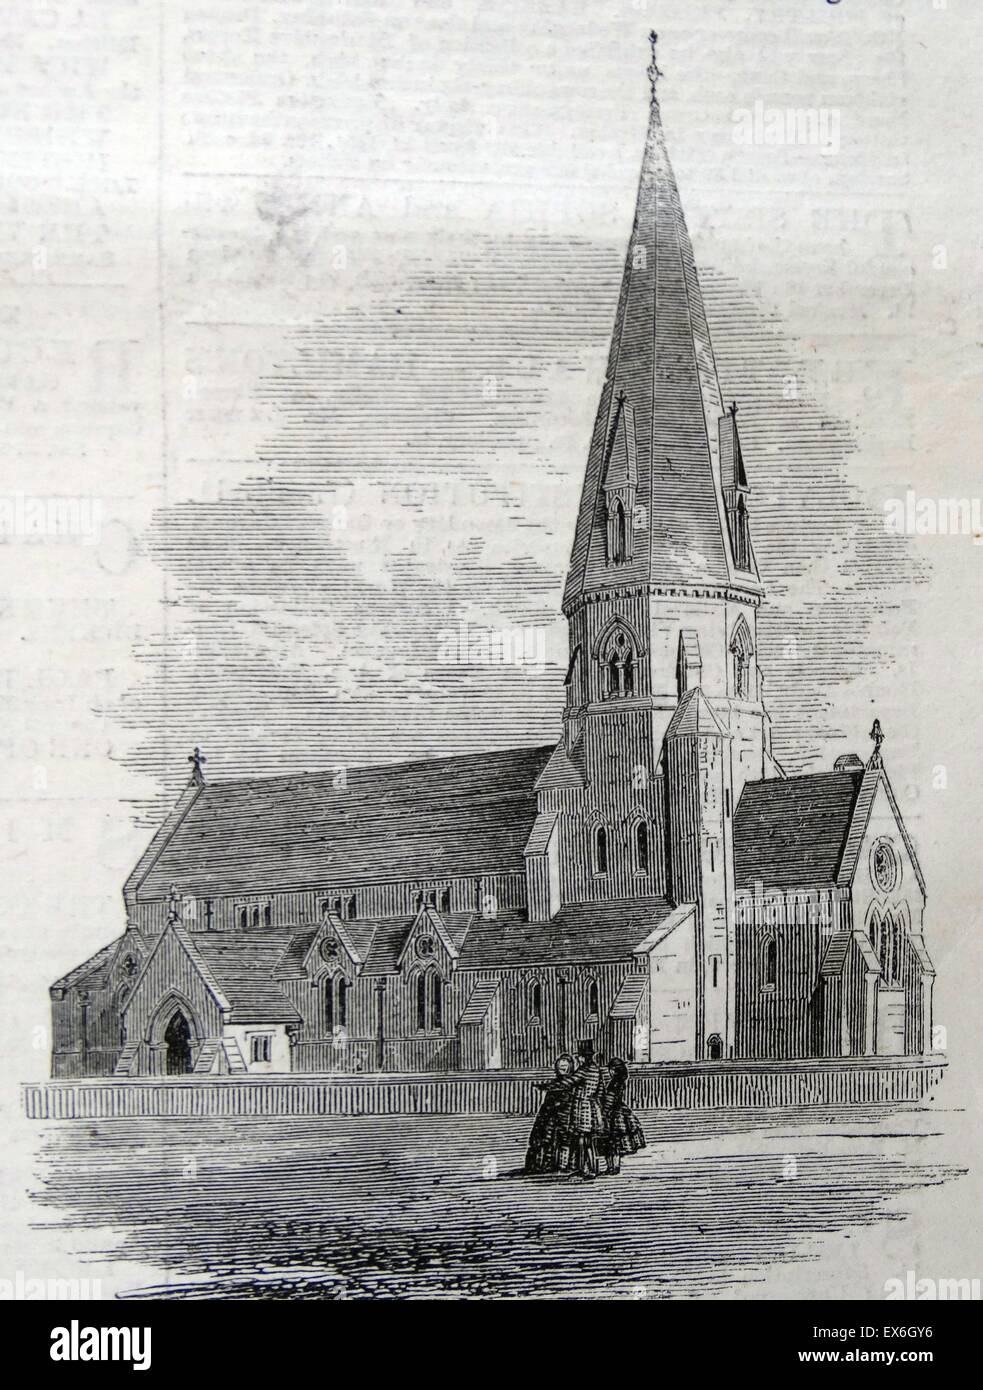 Engraving depicting the exterior of St. Michael's Church, Leafield, Oxfordshire. Dated 1860 Stock Photo